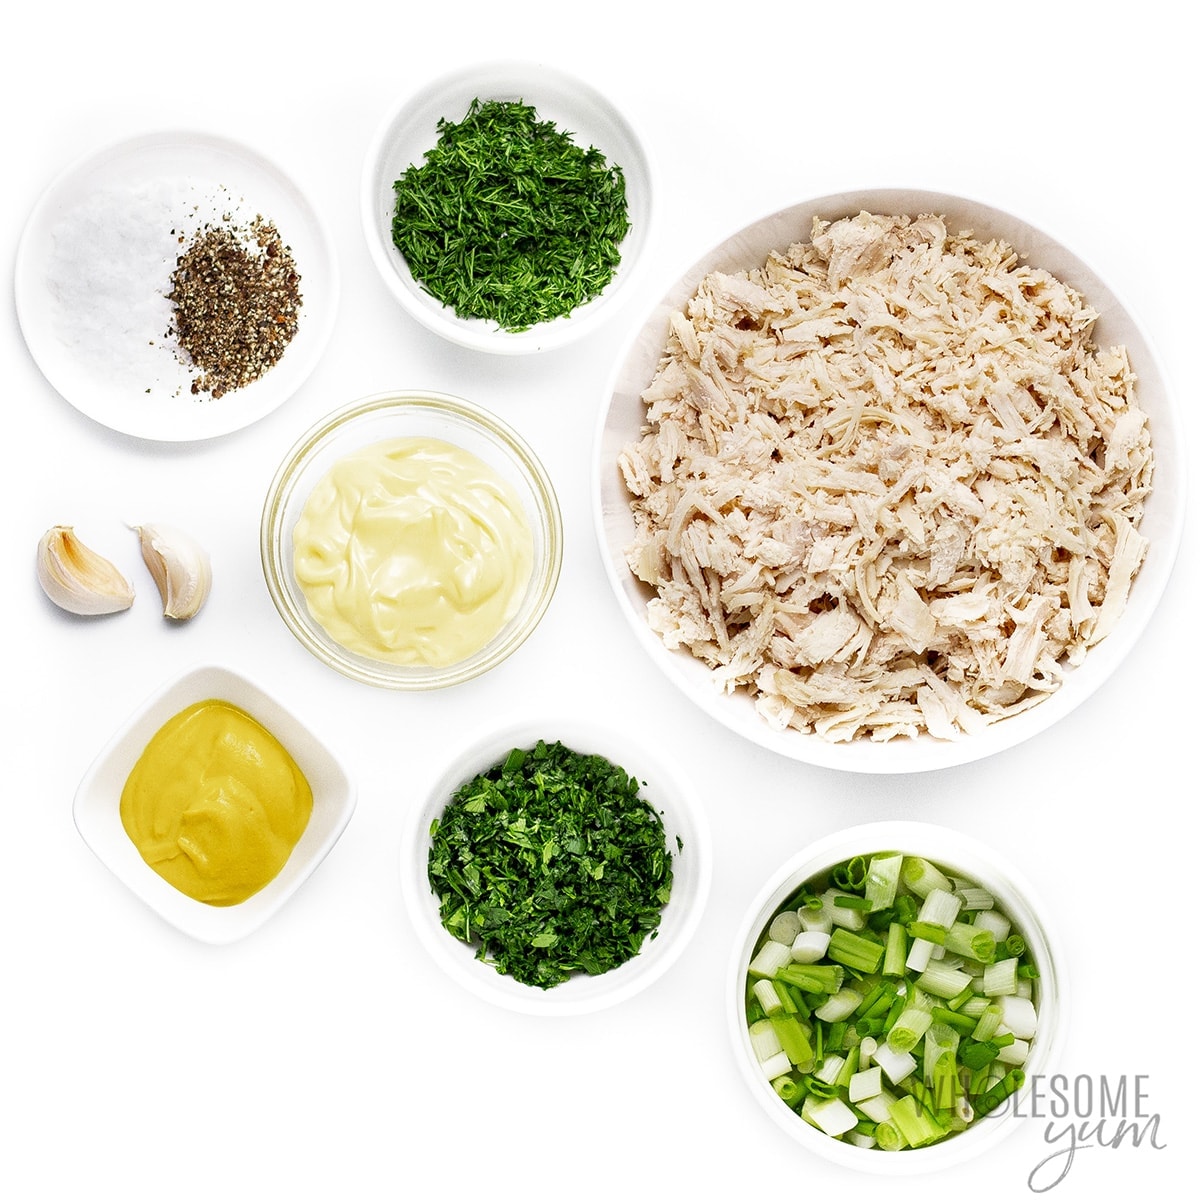 Low carb chicken salad ingredients in bowls.